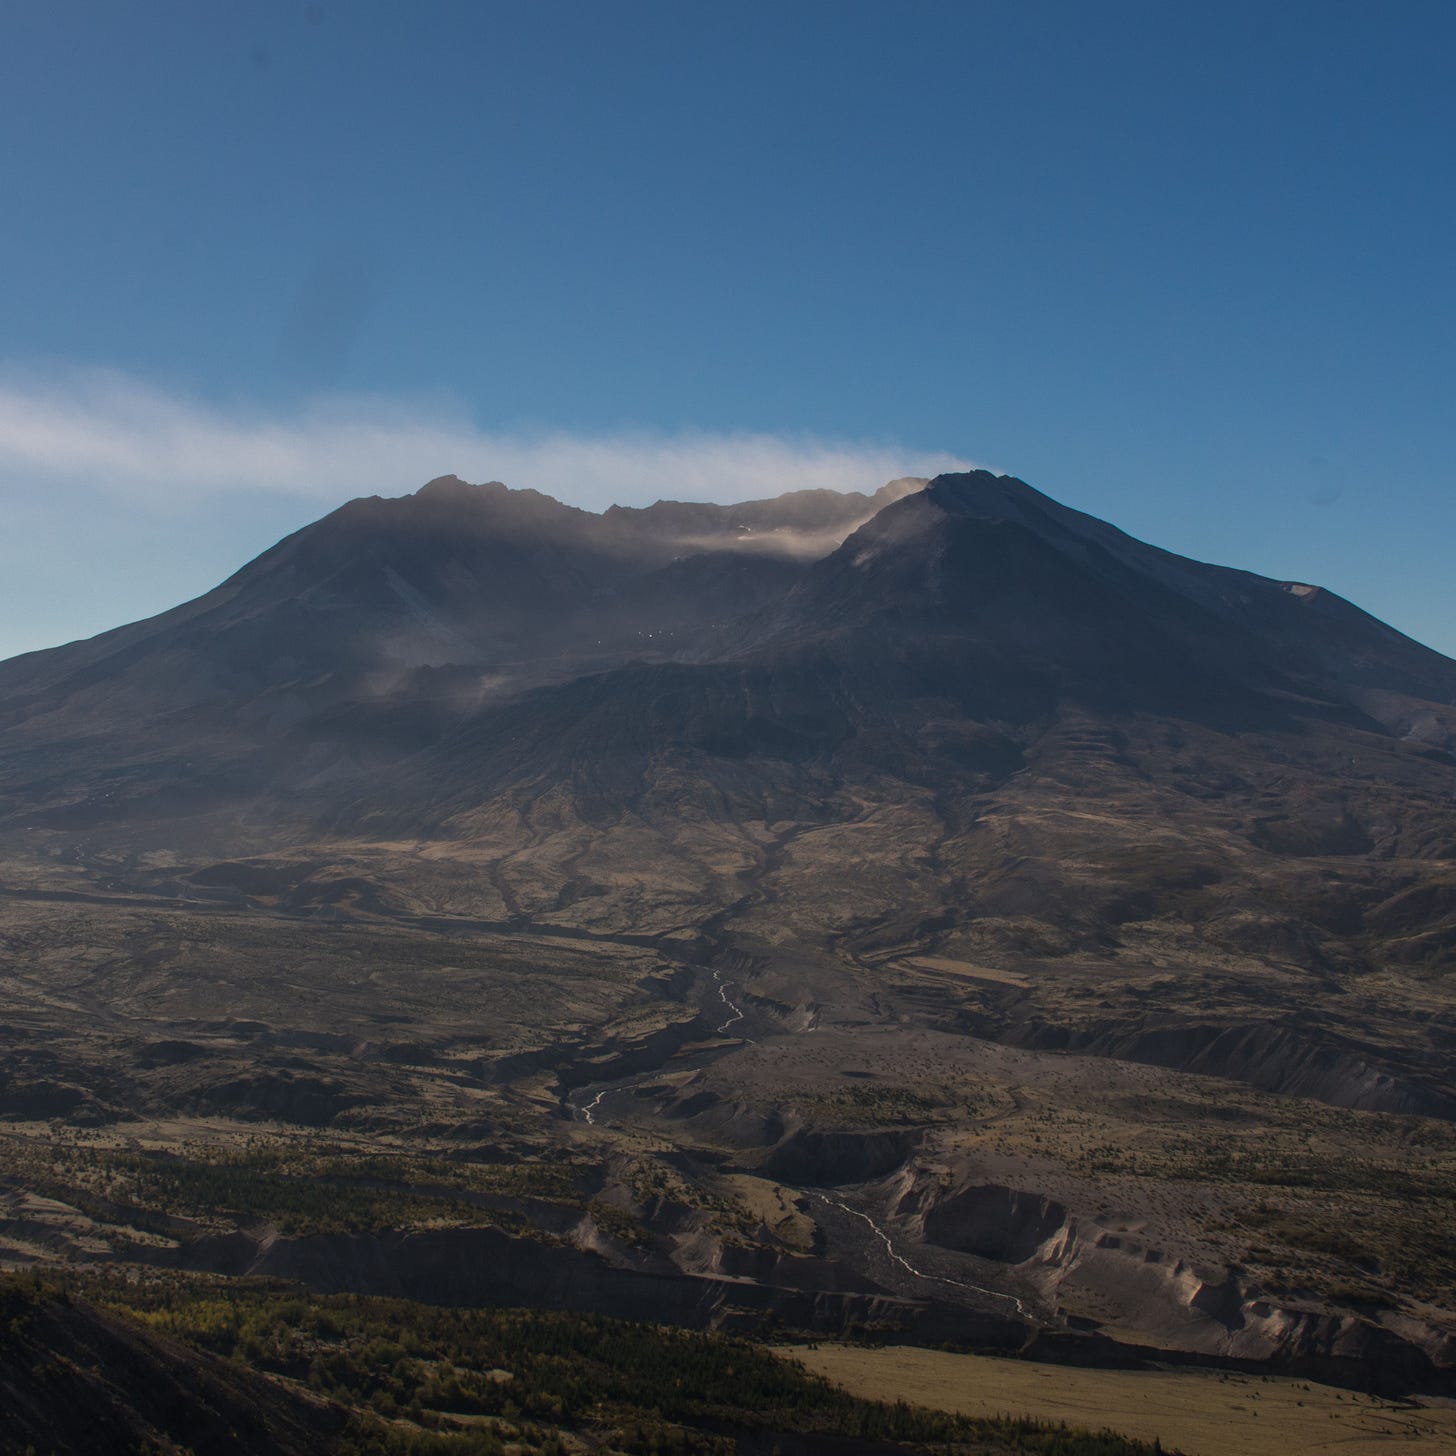 Bare slopes and crater of Mt. St. Helens with white smoke or cloud blowing from it under a clear blue sky.